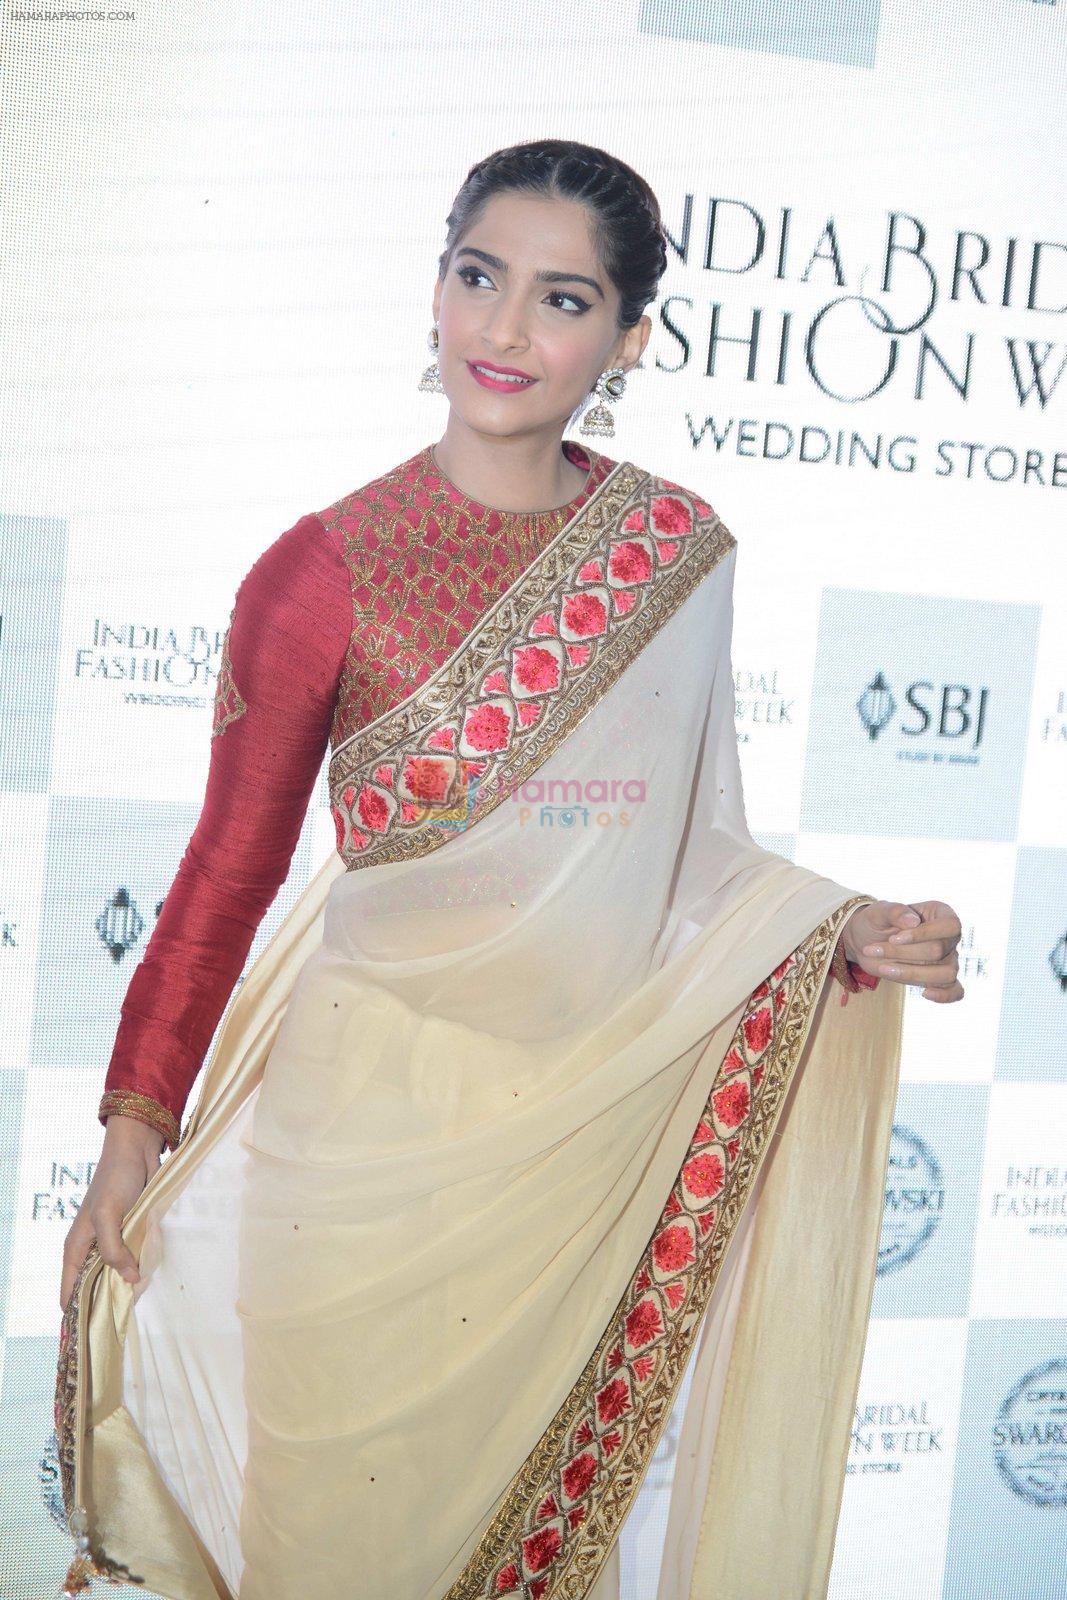 Sonam Kapoor during the launch of the first Indian Bridal Fashion Week Wedding Store, in New Delhi on 9th Sept 2016